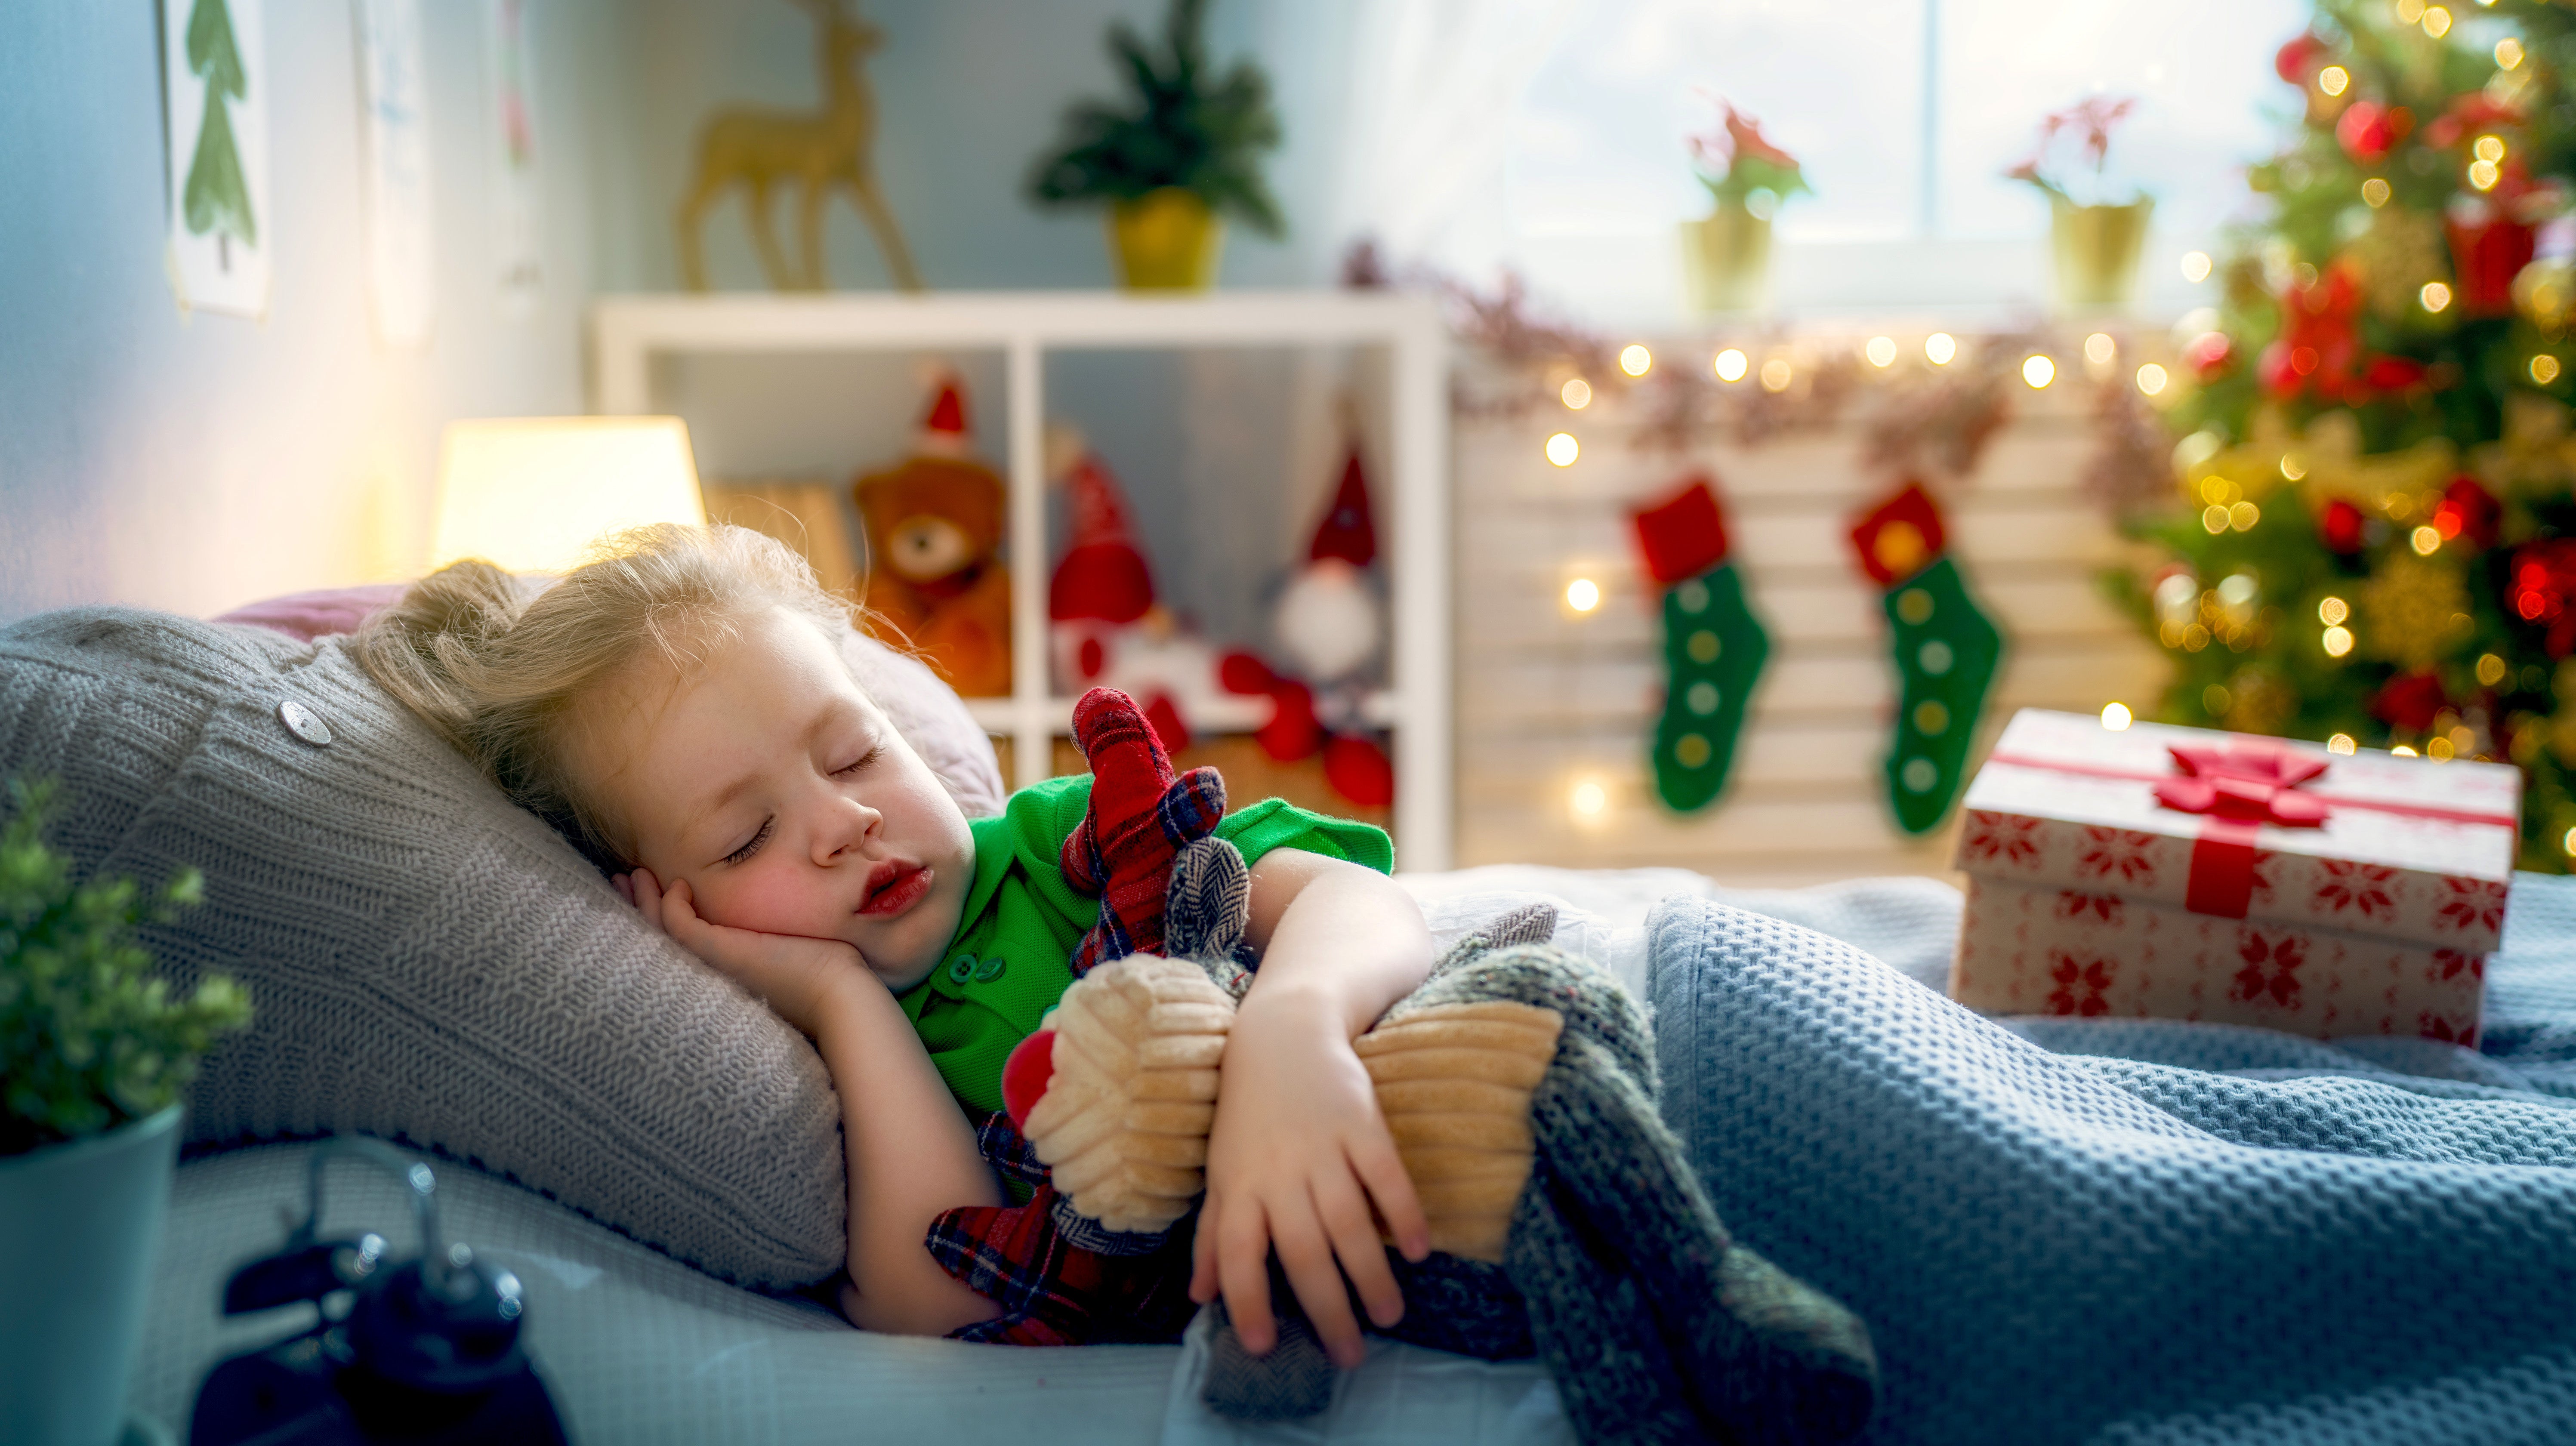 Turn Holiday Lights Into Festive ‘Nightlights’ In Your Kid’s Room